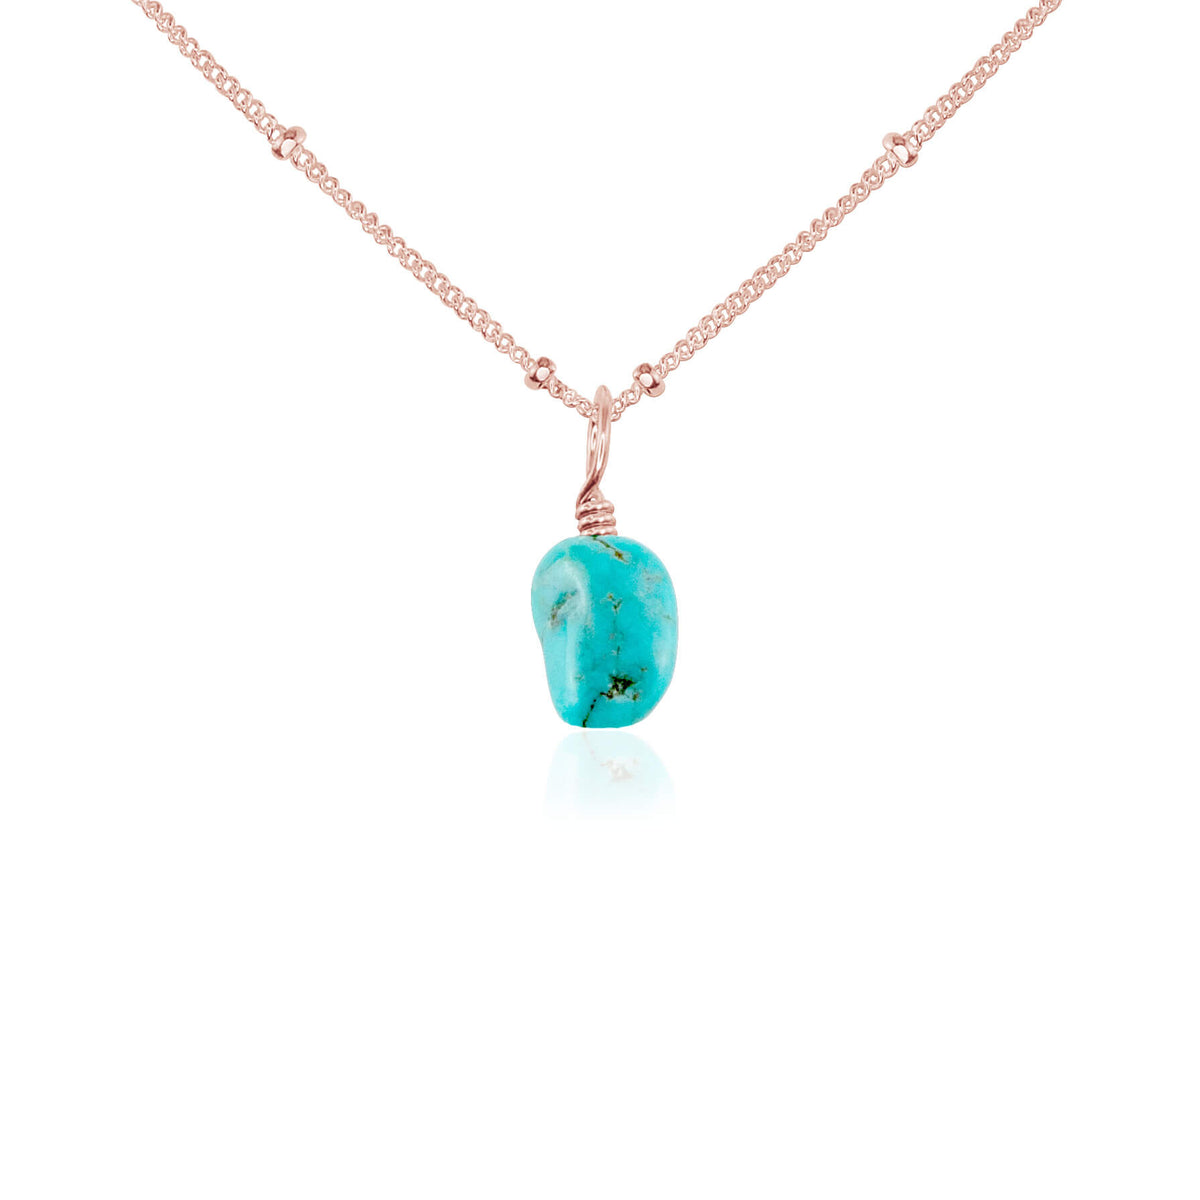 Raw Crystal Pendant Necklace - Turquoise - 14K Rose Gold Fill Satellite - Luna Tide Handmade Jewellery